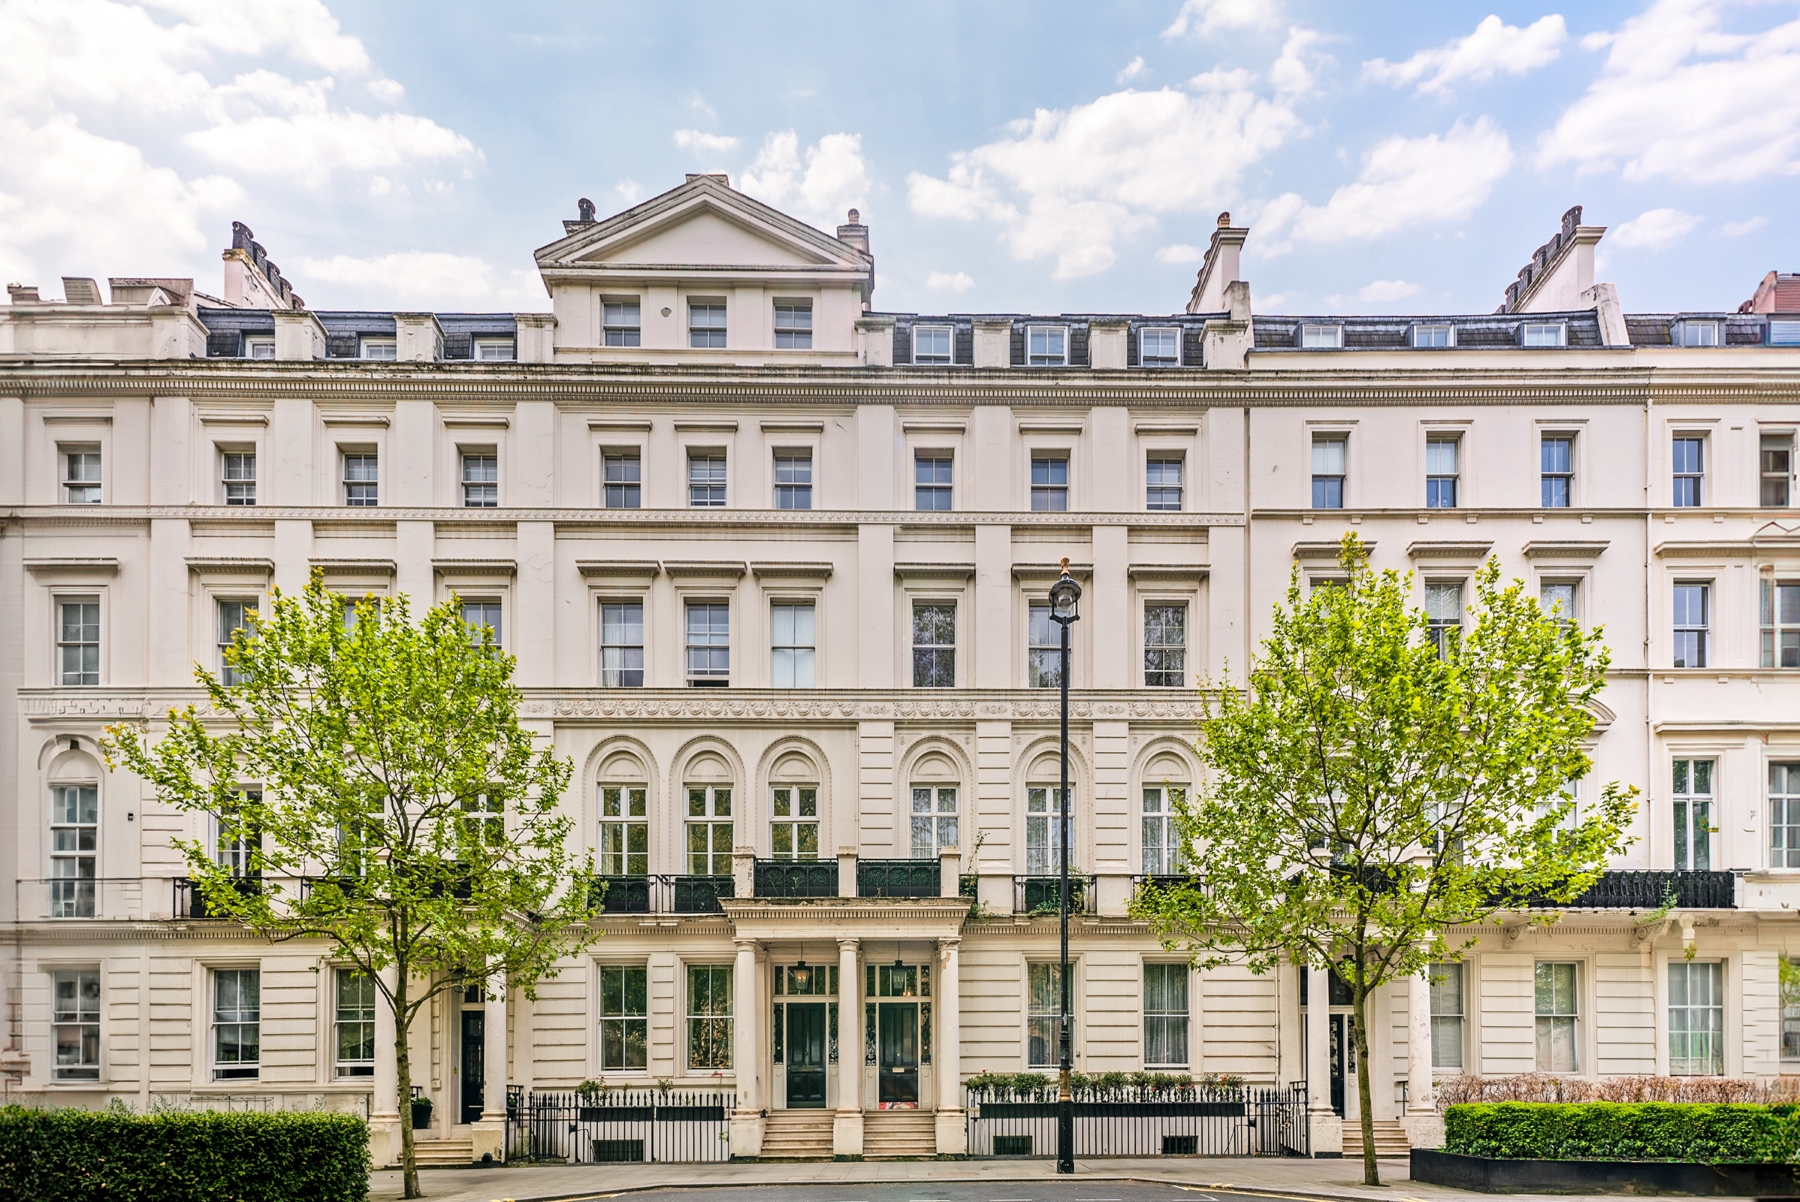 Refurbished apartment in redeveloped moments from Buckingham Palace